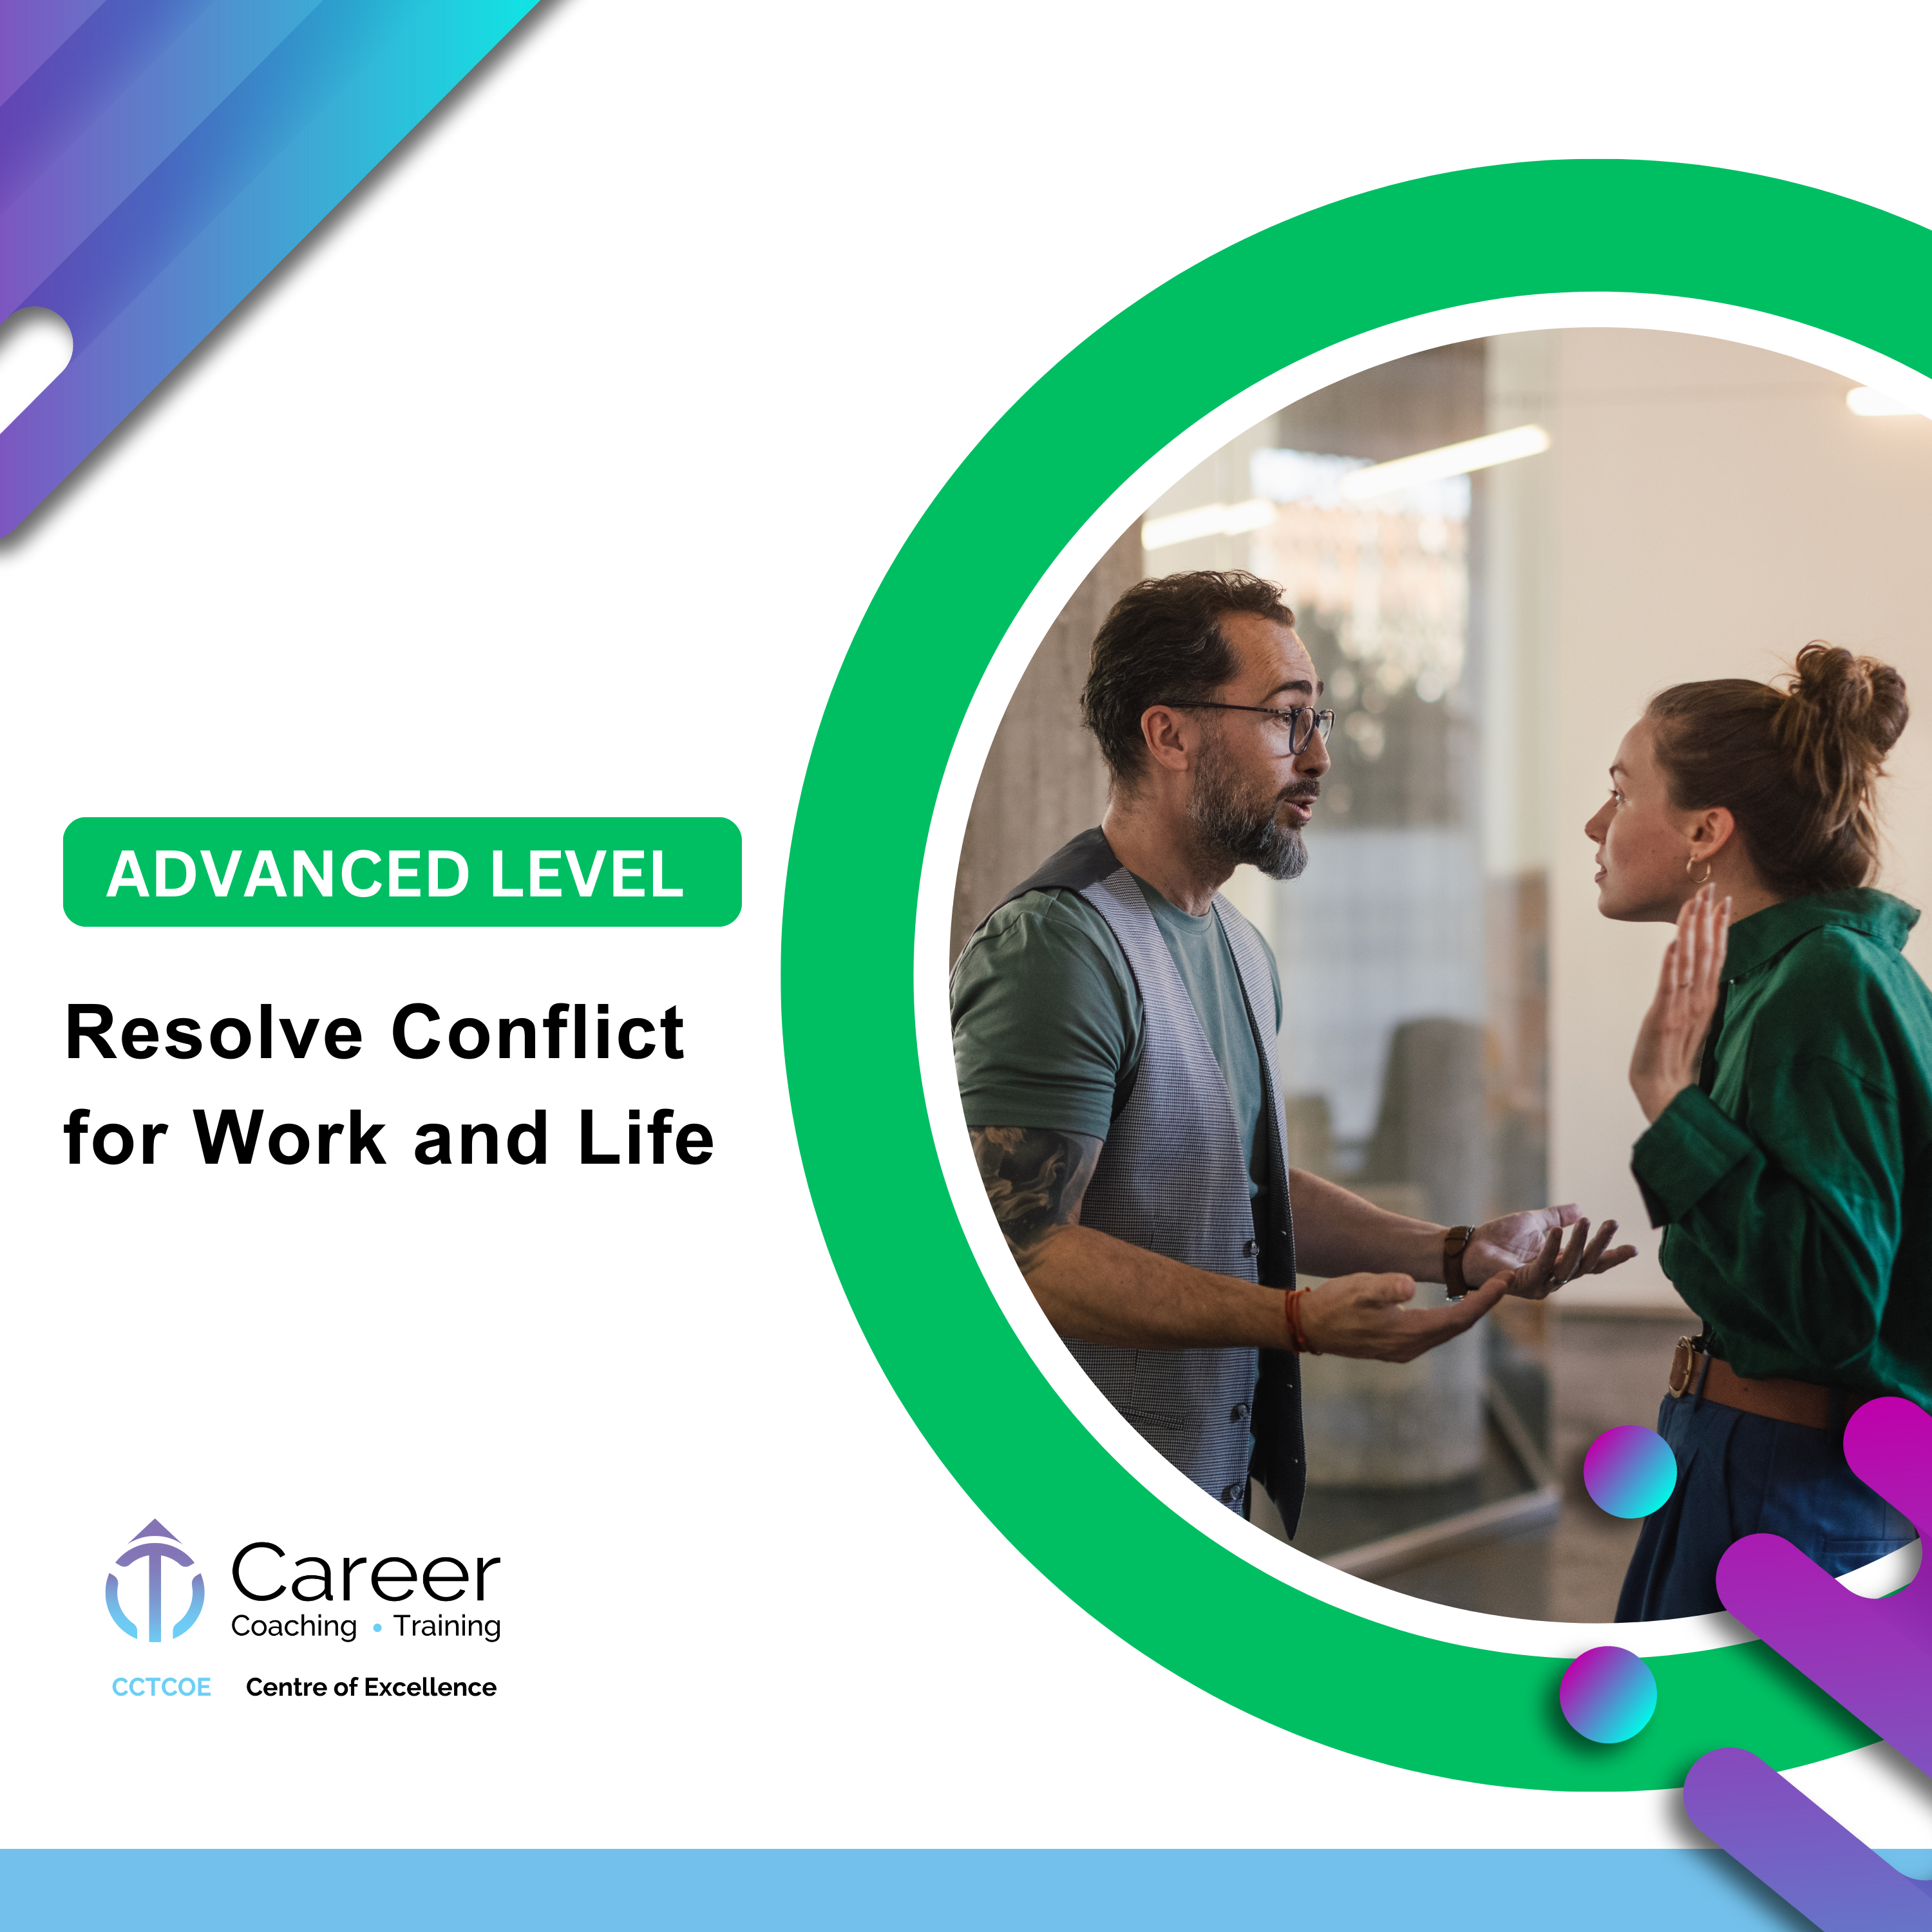 Resolve Conflict for Work and Life